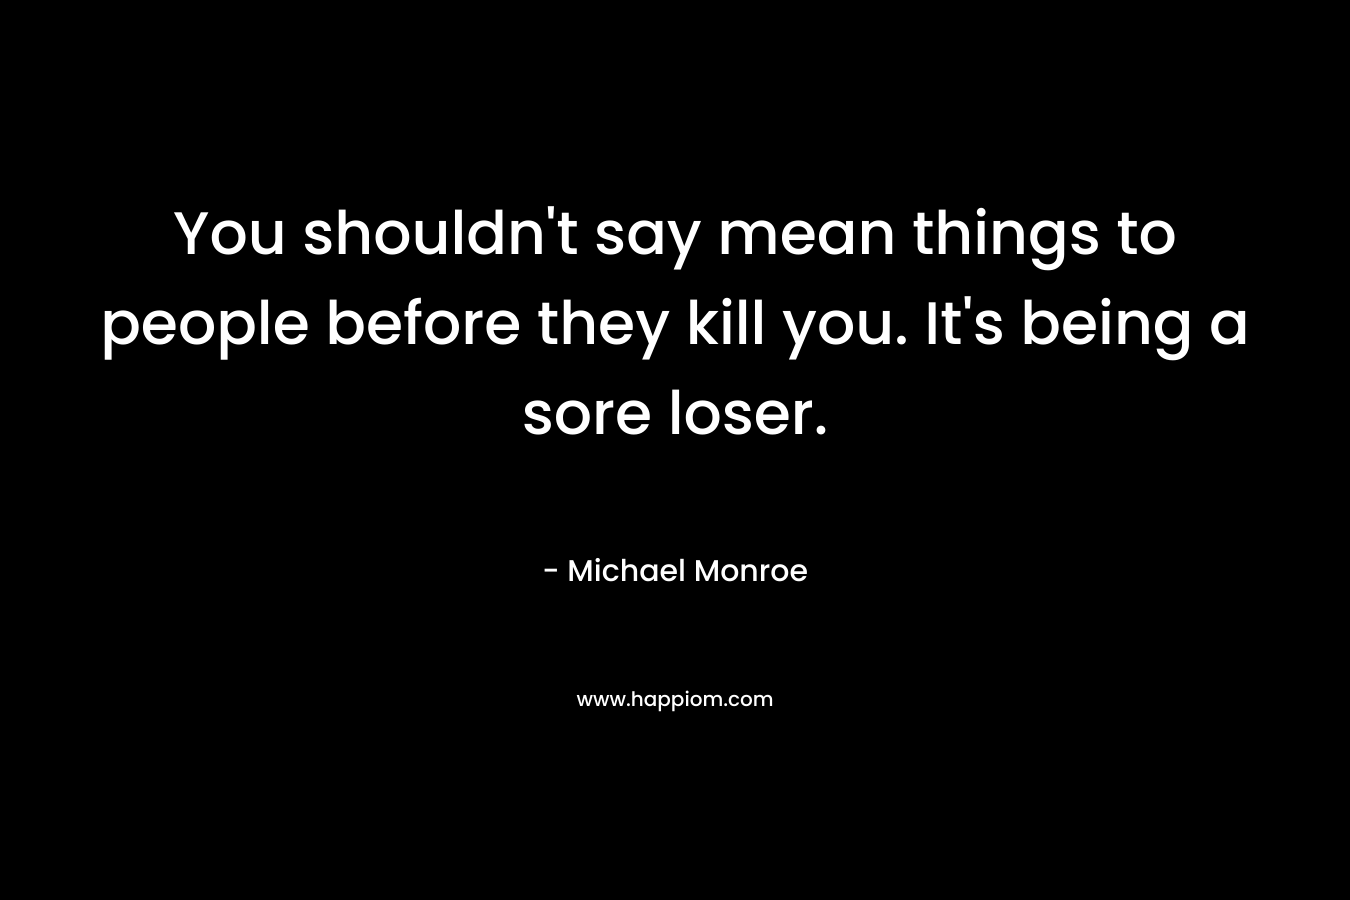 You shouldn’t say mean things to people before they kill you. It’s being a sore loser. – Michael Monroe